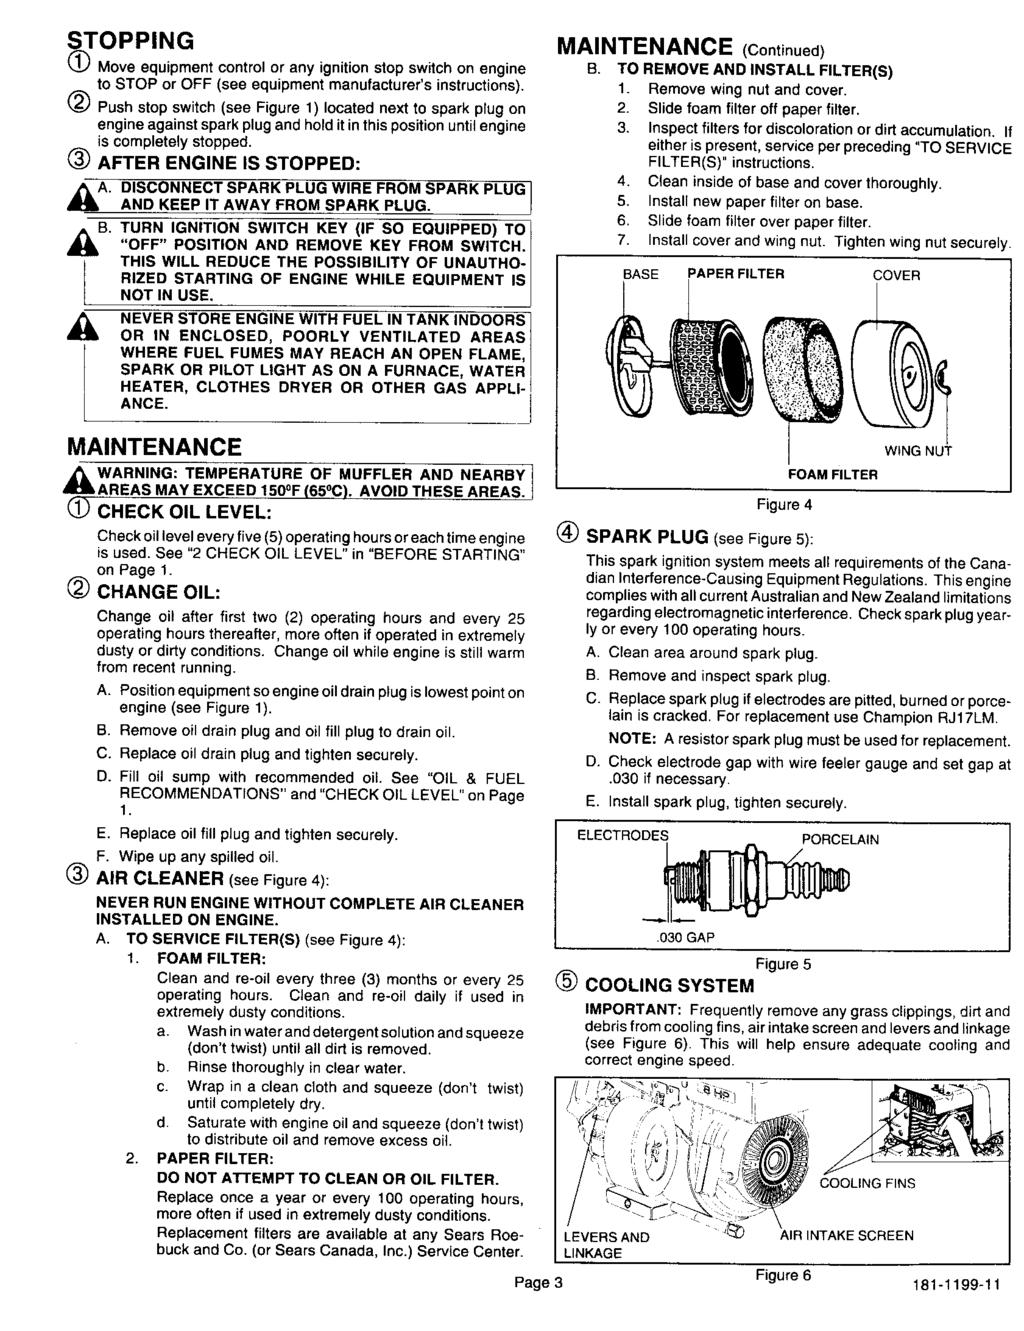 STOPPING (_) (_) Move equipment control or any ignition stop switch on engine to STOP or OFF (see equipment manufacturer's instructions).